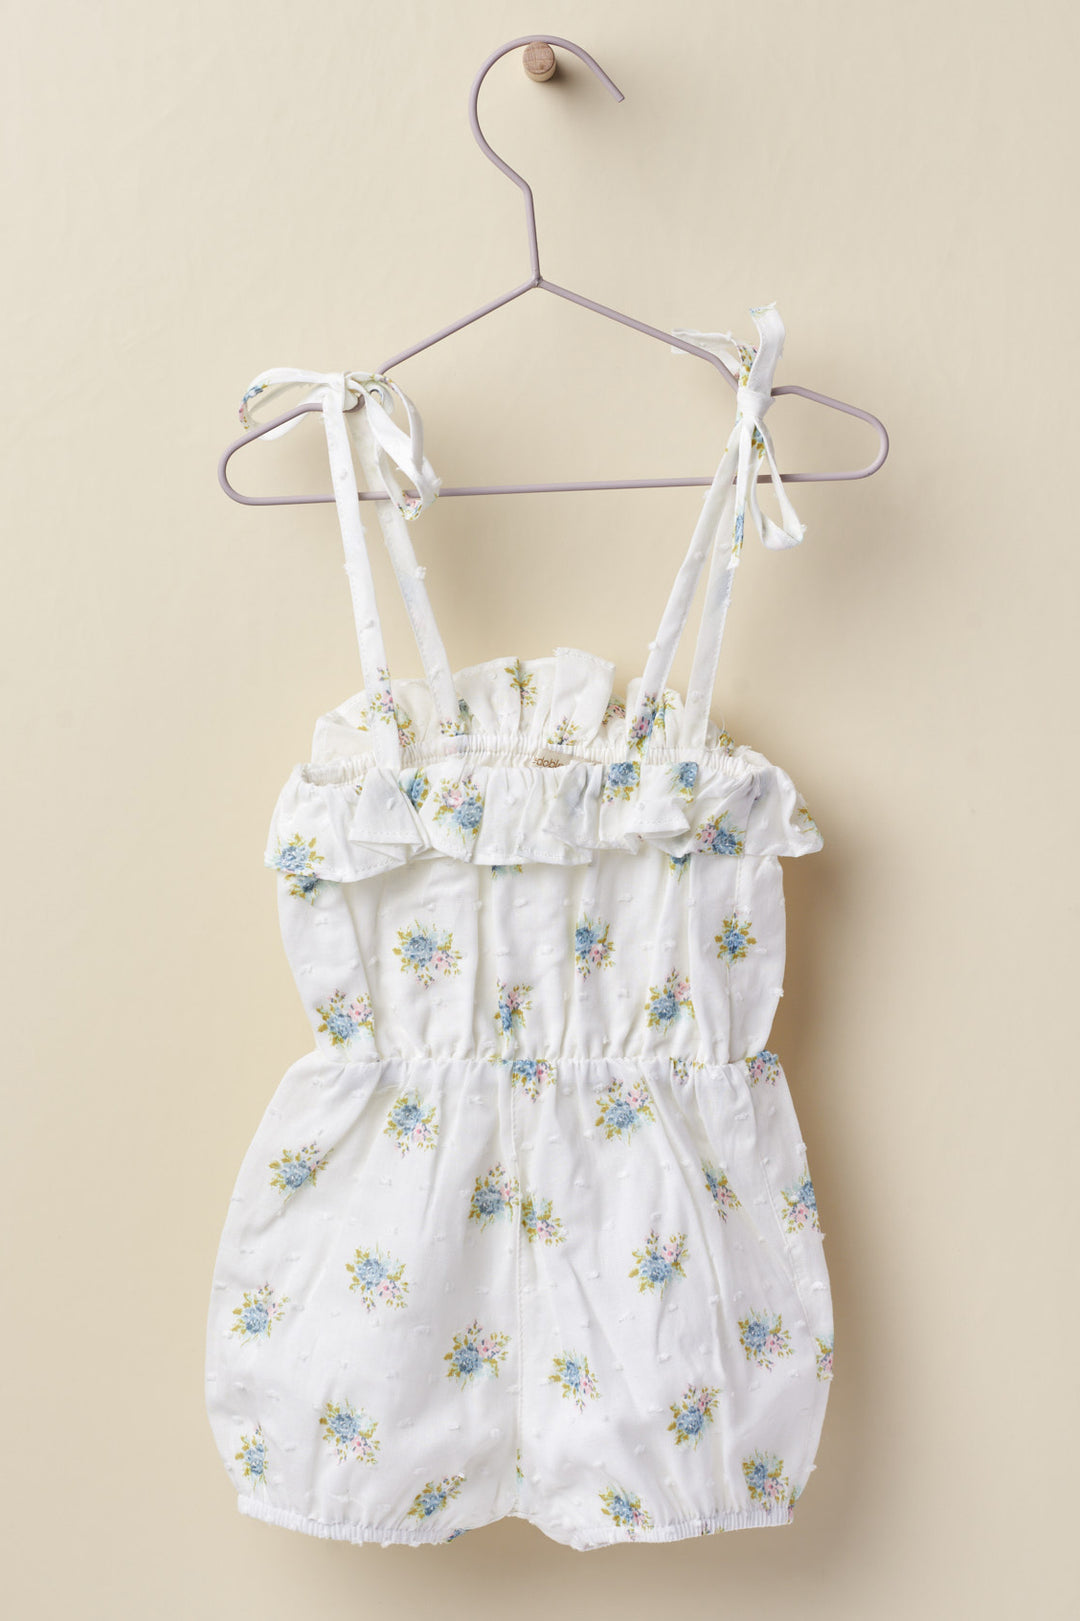 Wedoble "Lettie" Soft Blue Floral Playsuit | Millie and John